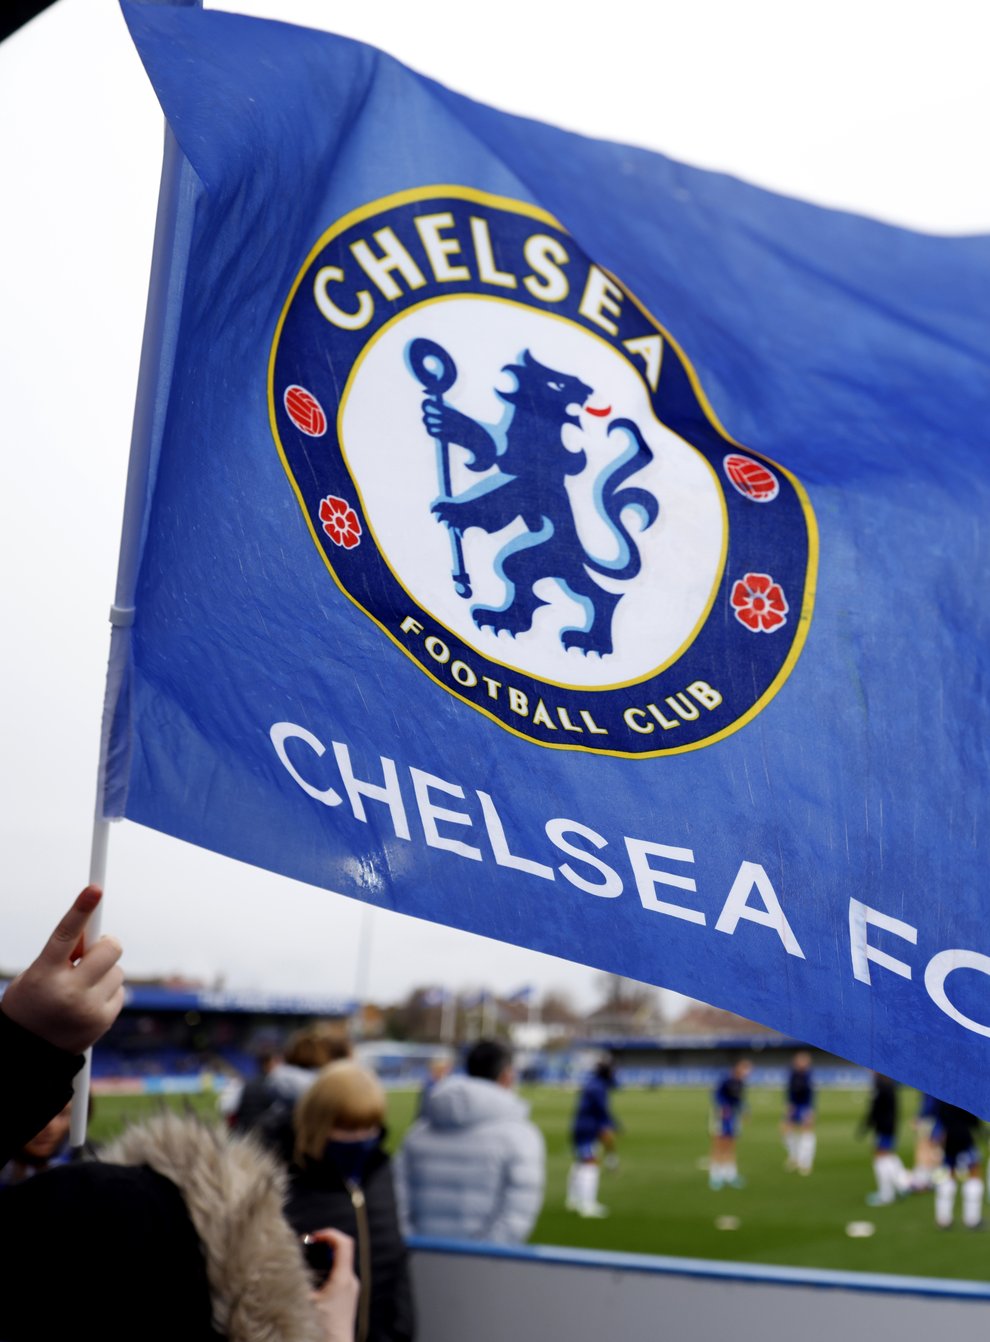 Steve Pagliuca has set out his vision for Chelsea’s future (Steven Paston/PA)